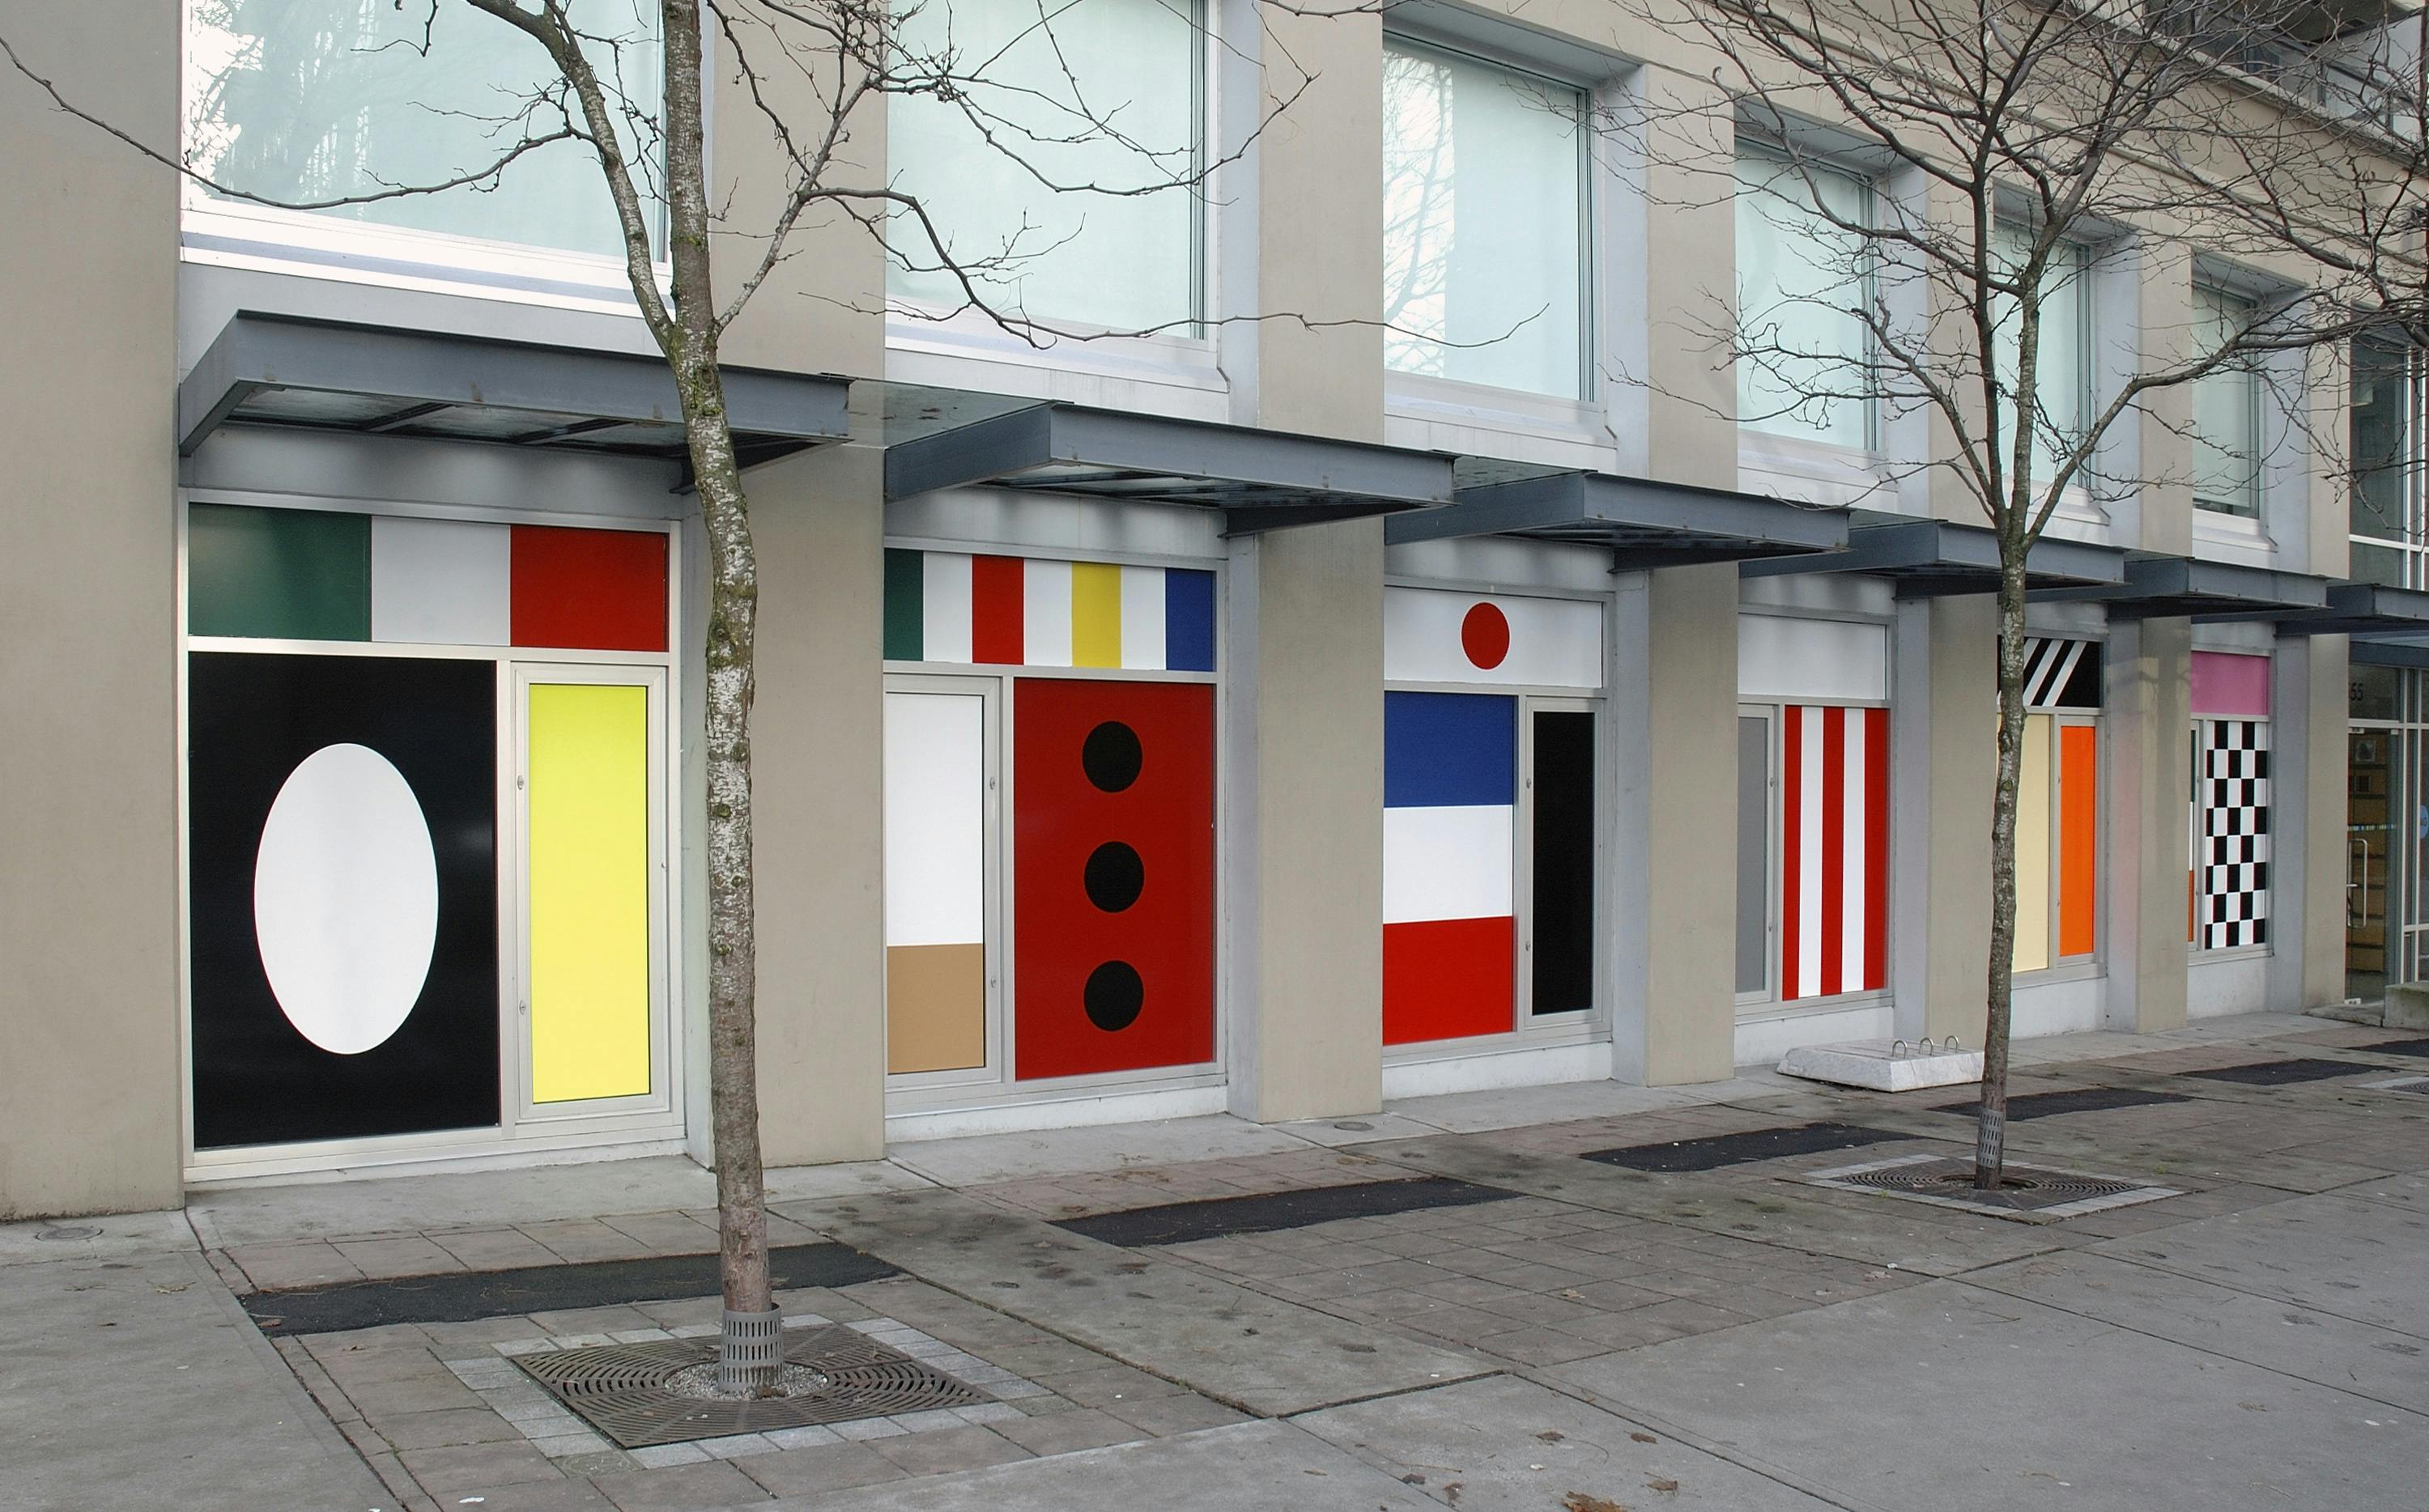 Install image of the first floor windows of CAG facing Nelson Street. Vinyl sheets of many patterns in various bold colours cover the windows.